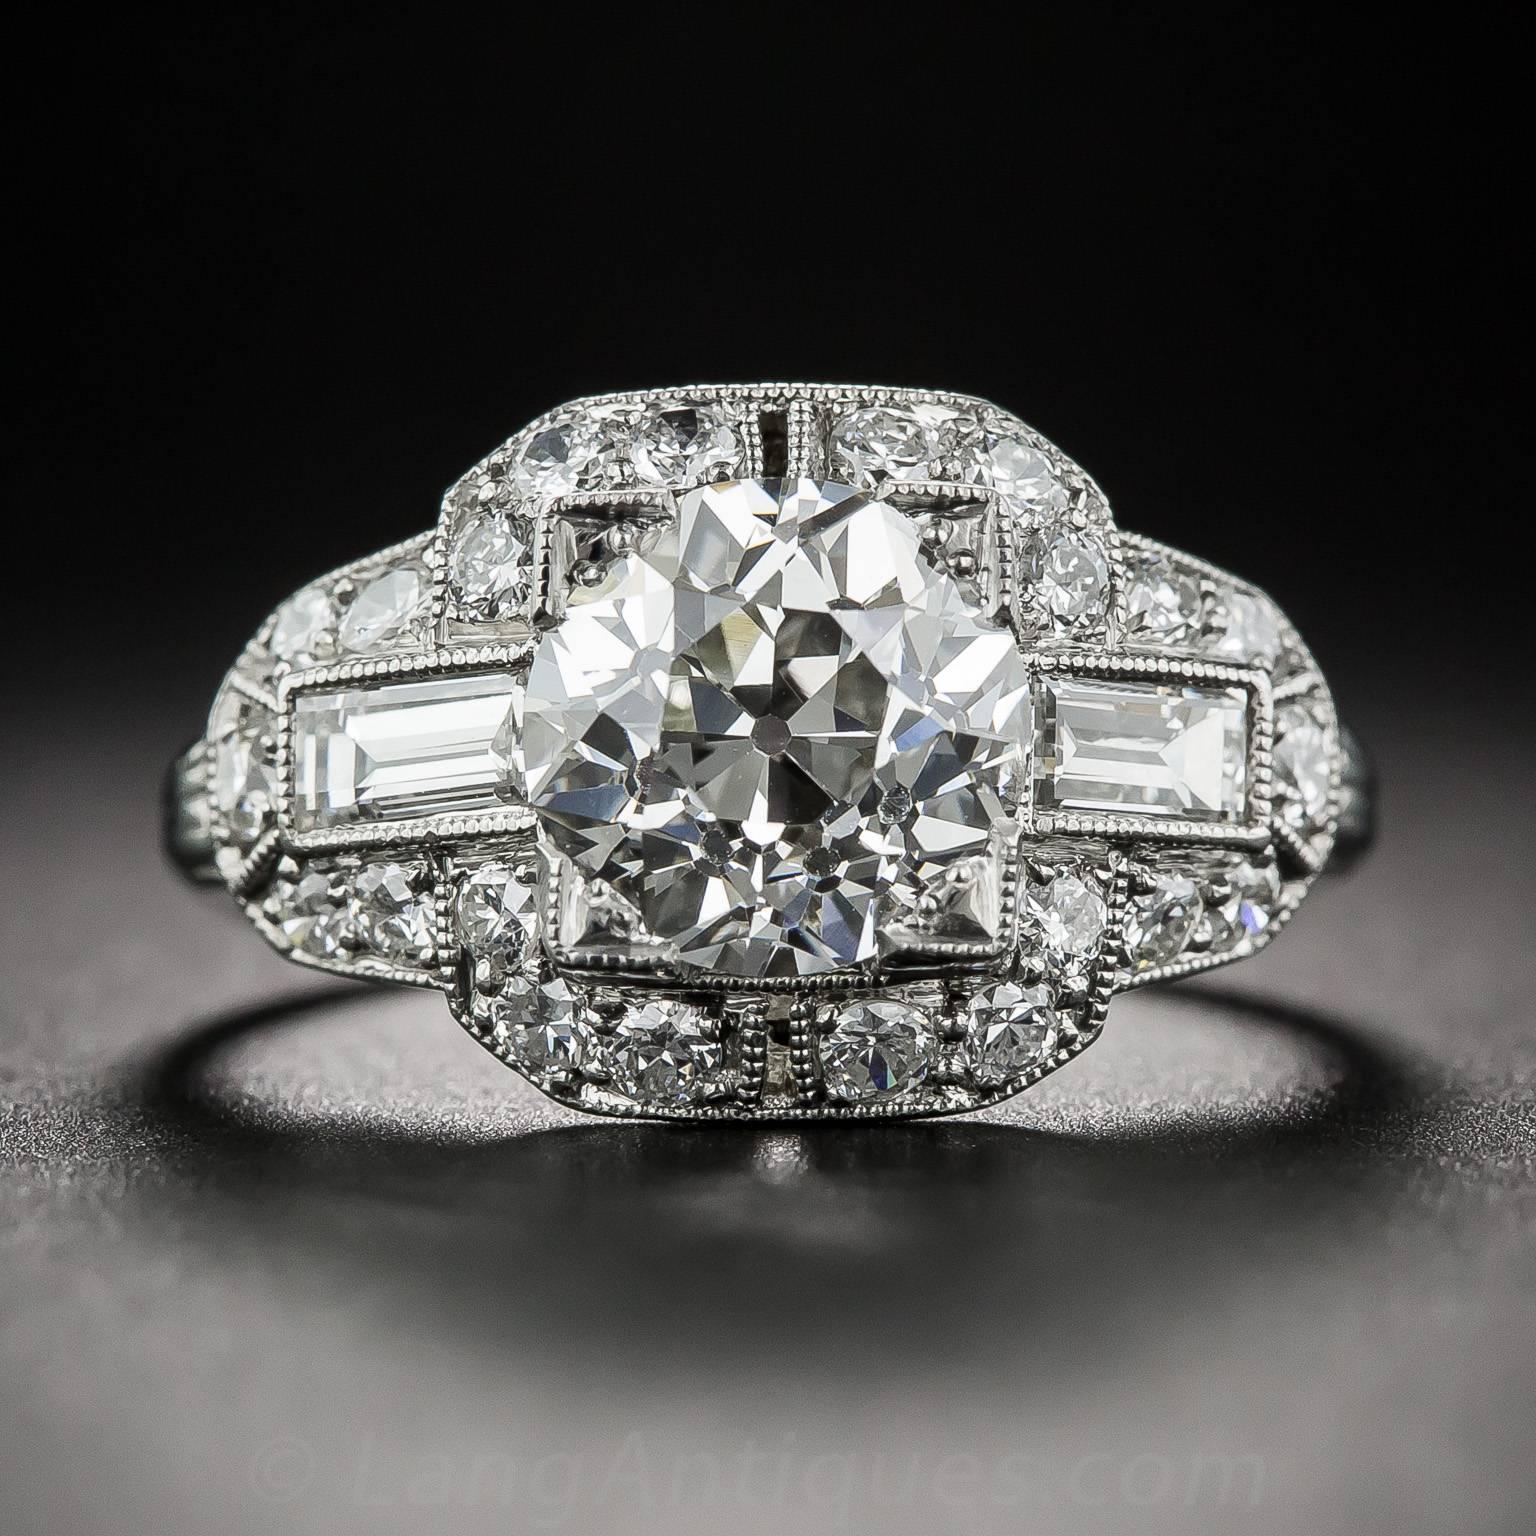 A stunning, original Art Deco 'cigar band' ring, circa 1930, sparkling front and center with a bright white and beautiful European-cut diamond, weighing 2.11 carats. Presented in platinum, the center stone is embellished all around with small